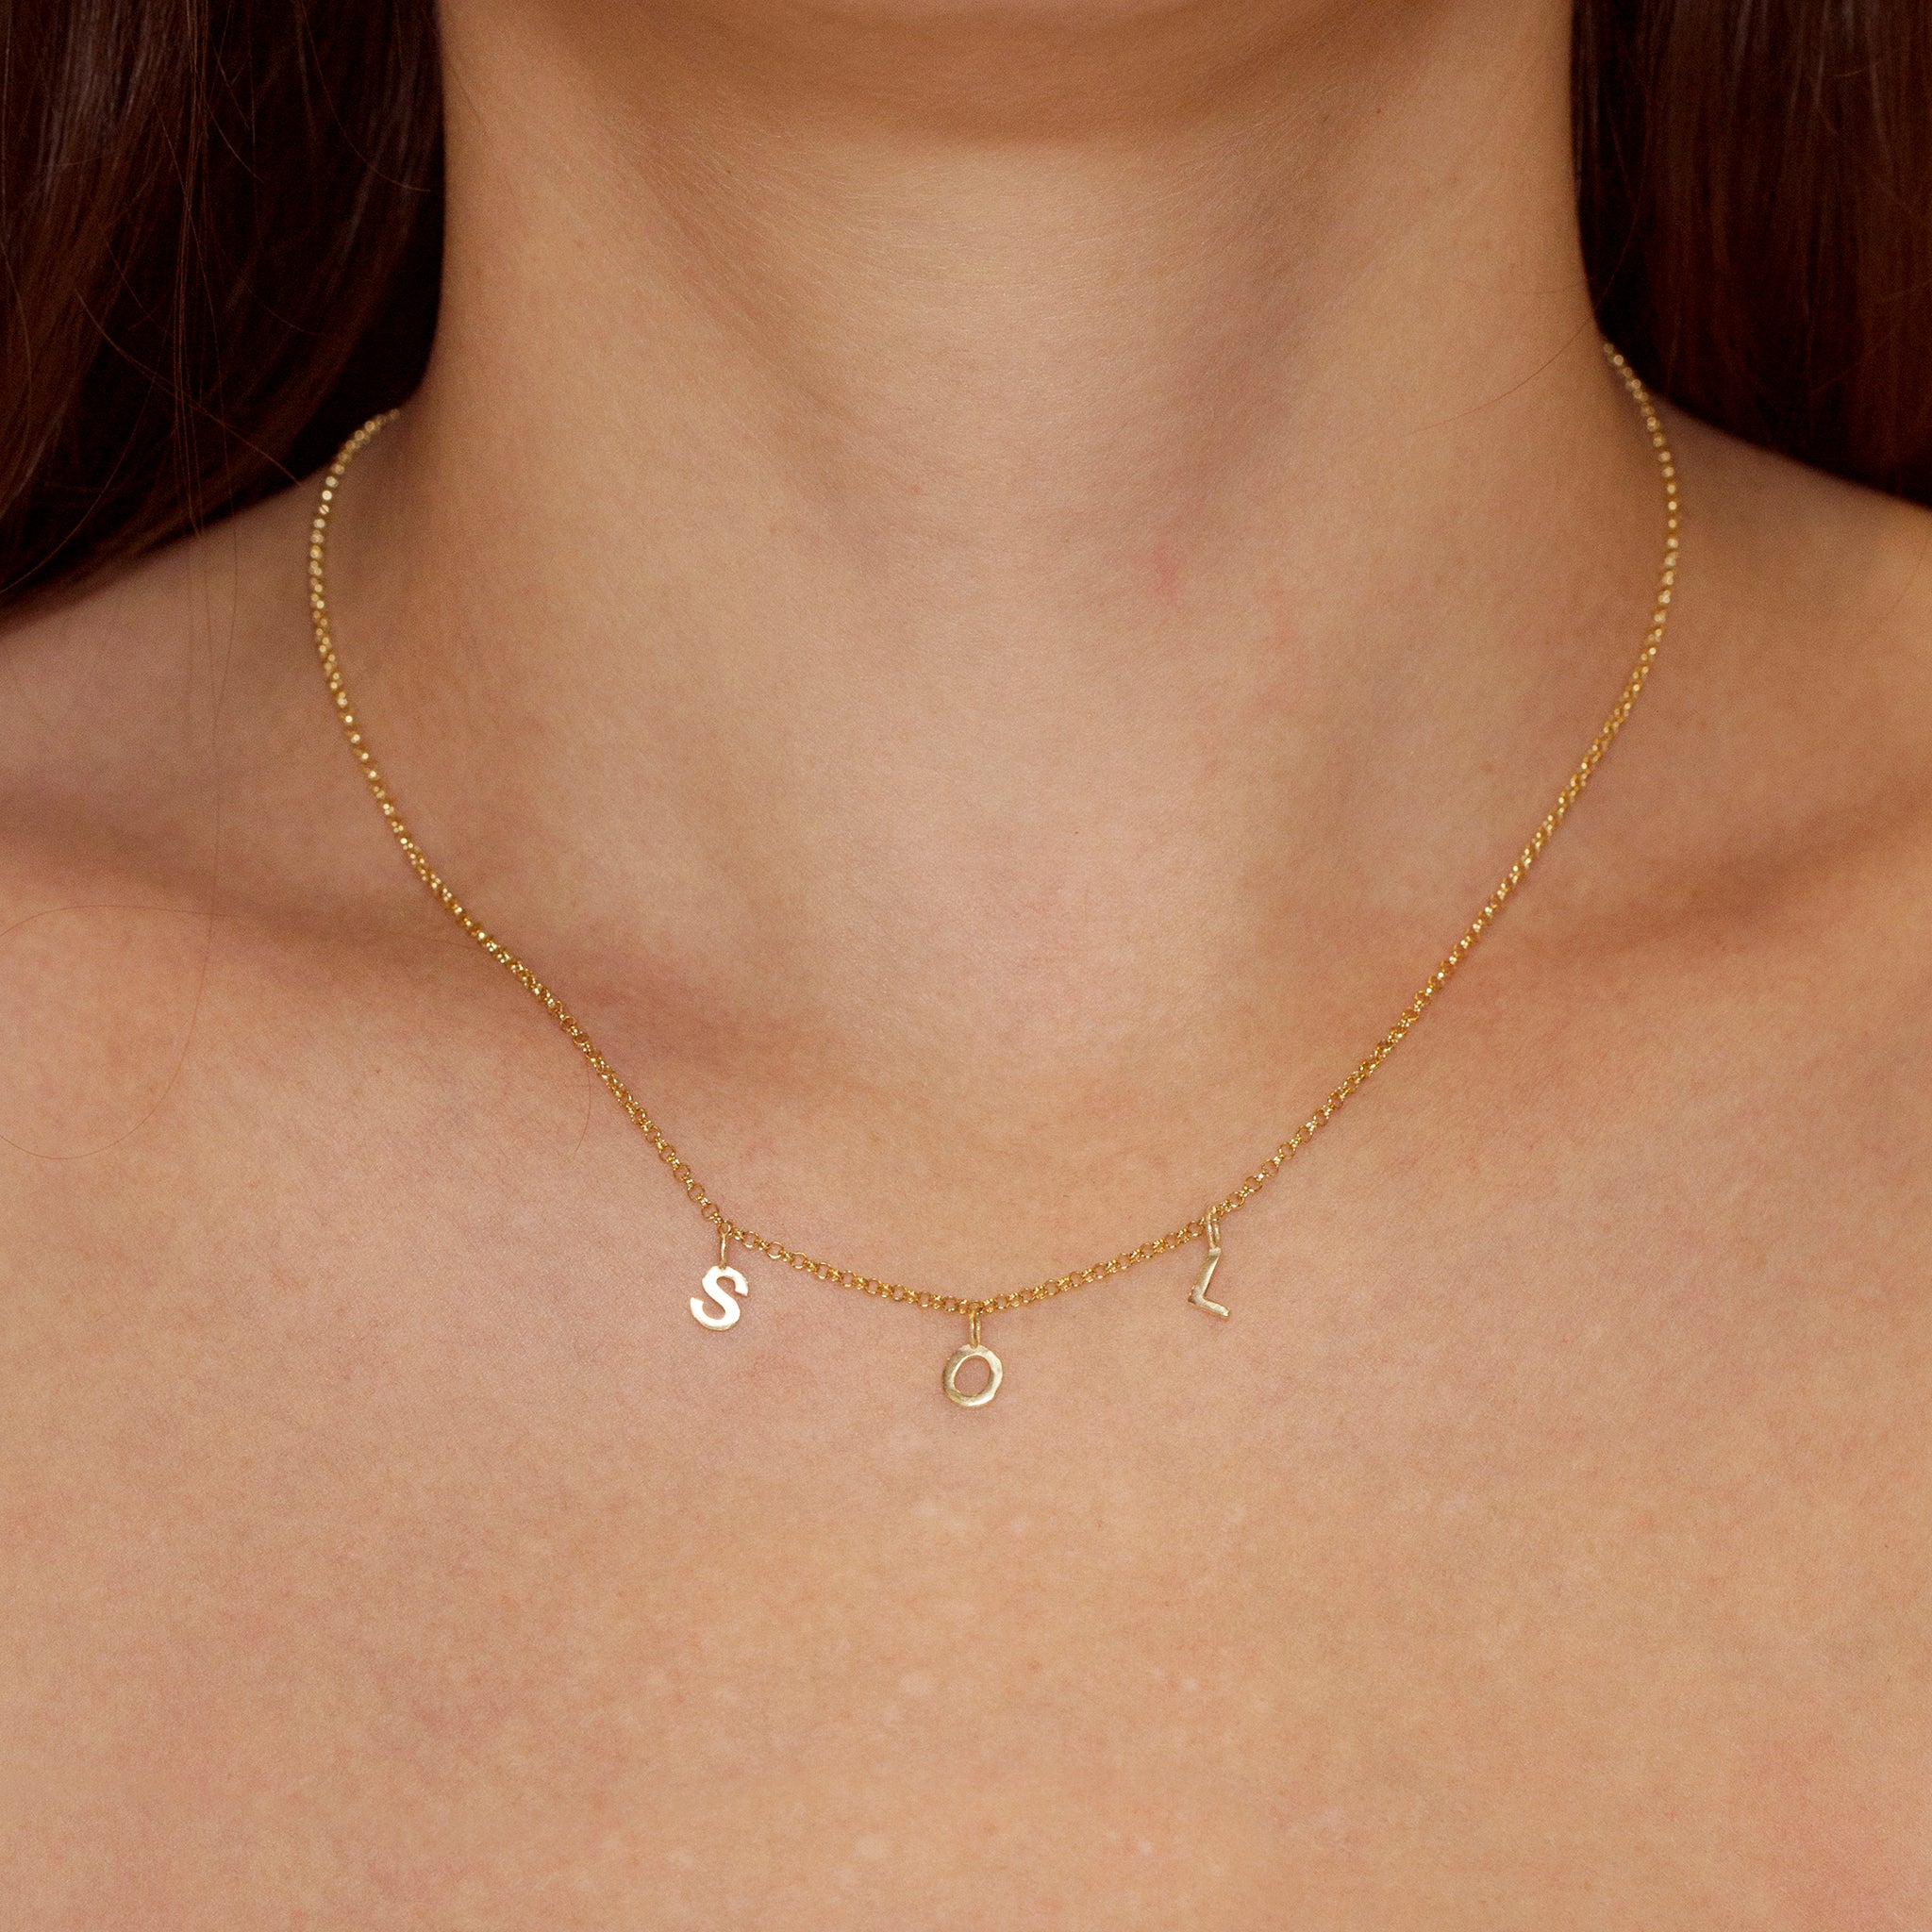 Dainty Monogram Necklace - K in Gold | Altar'd State